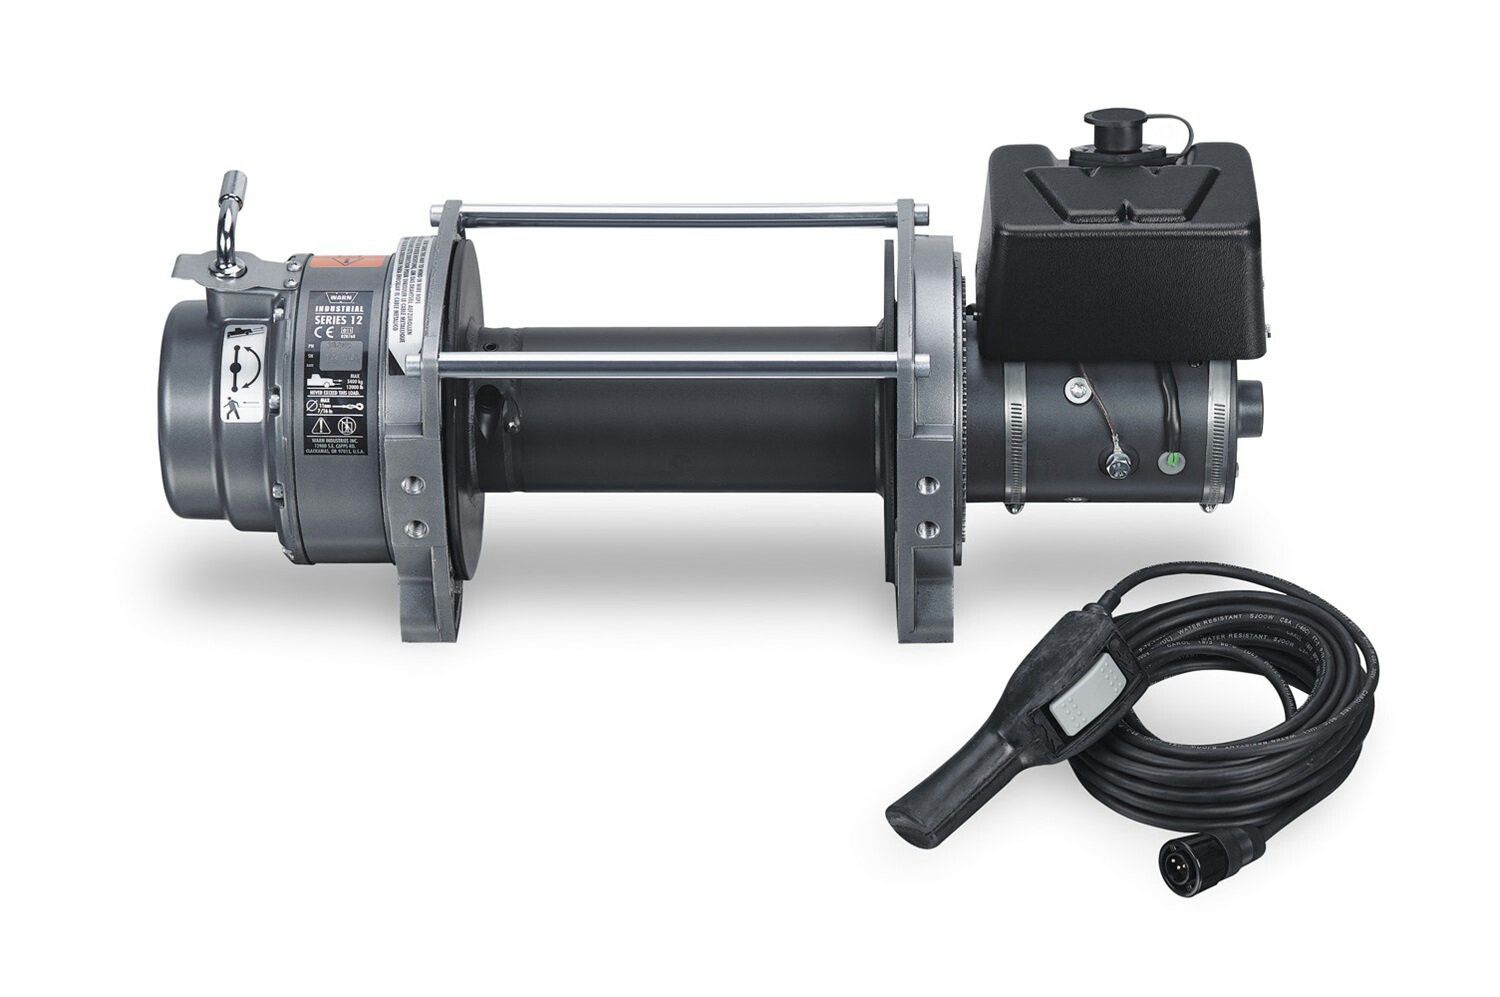 New - Warn 30289 Series 12 DC Industrial Electric Winch